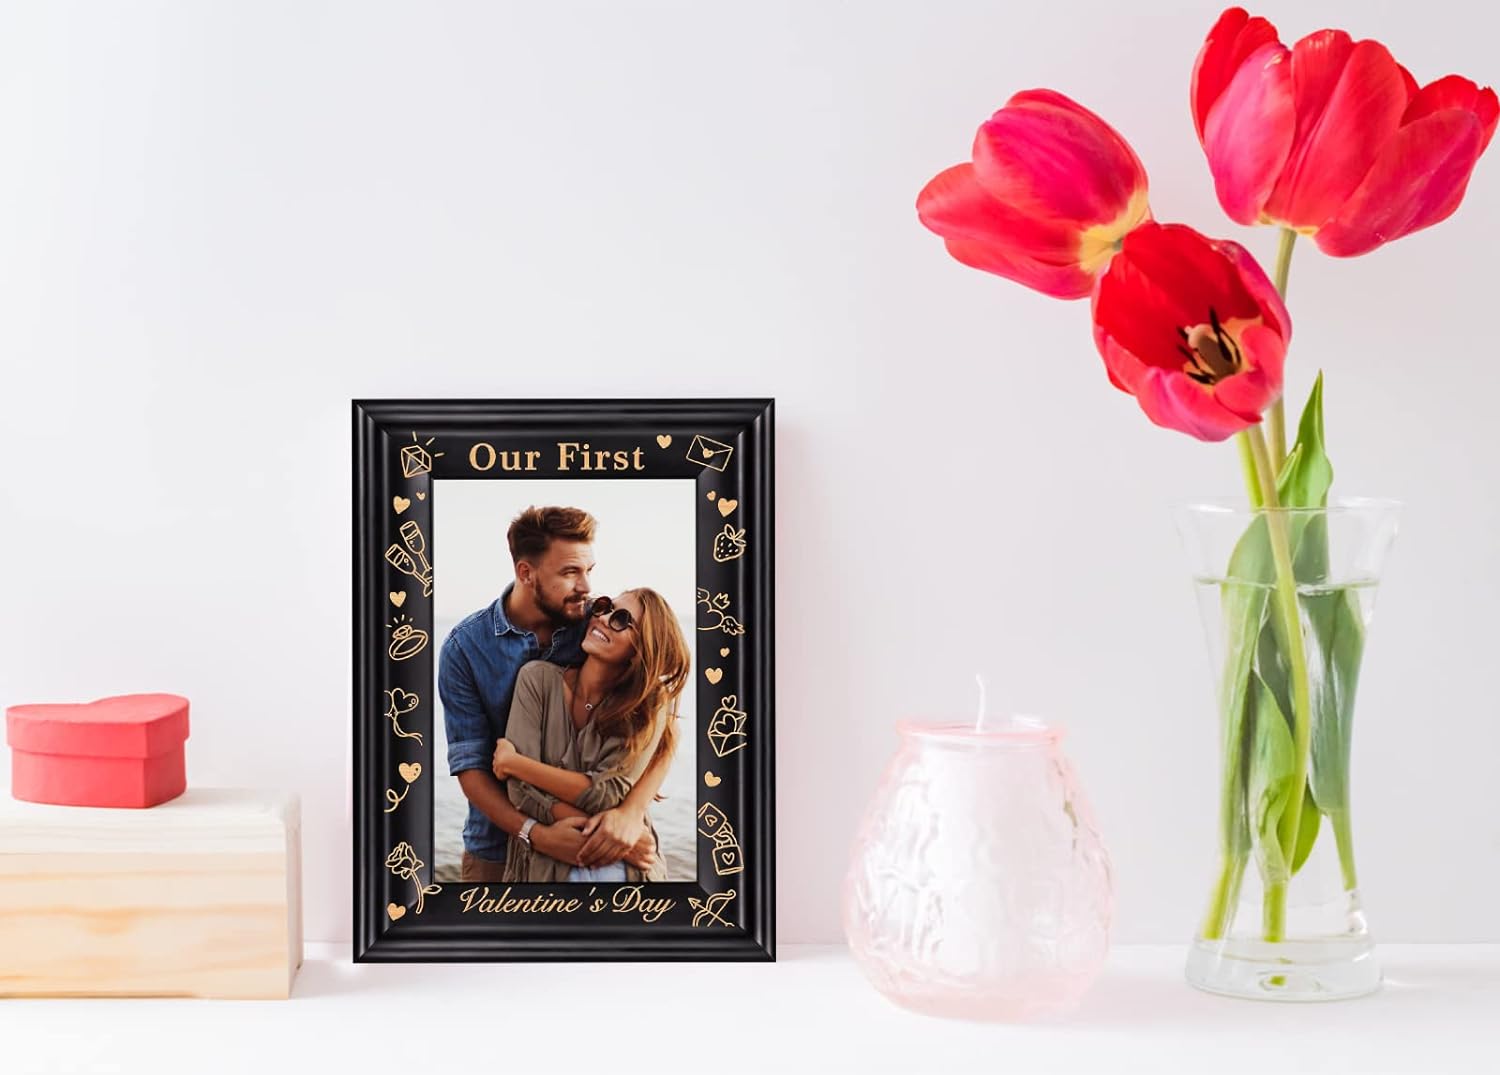 First Valentine's Day | Romantic Valentines Day Gifts For Wife Husband Couples Name